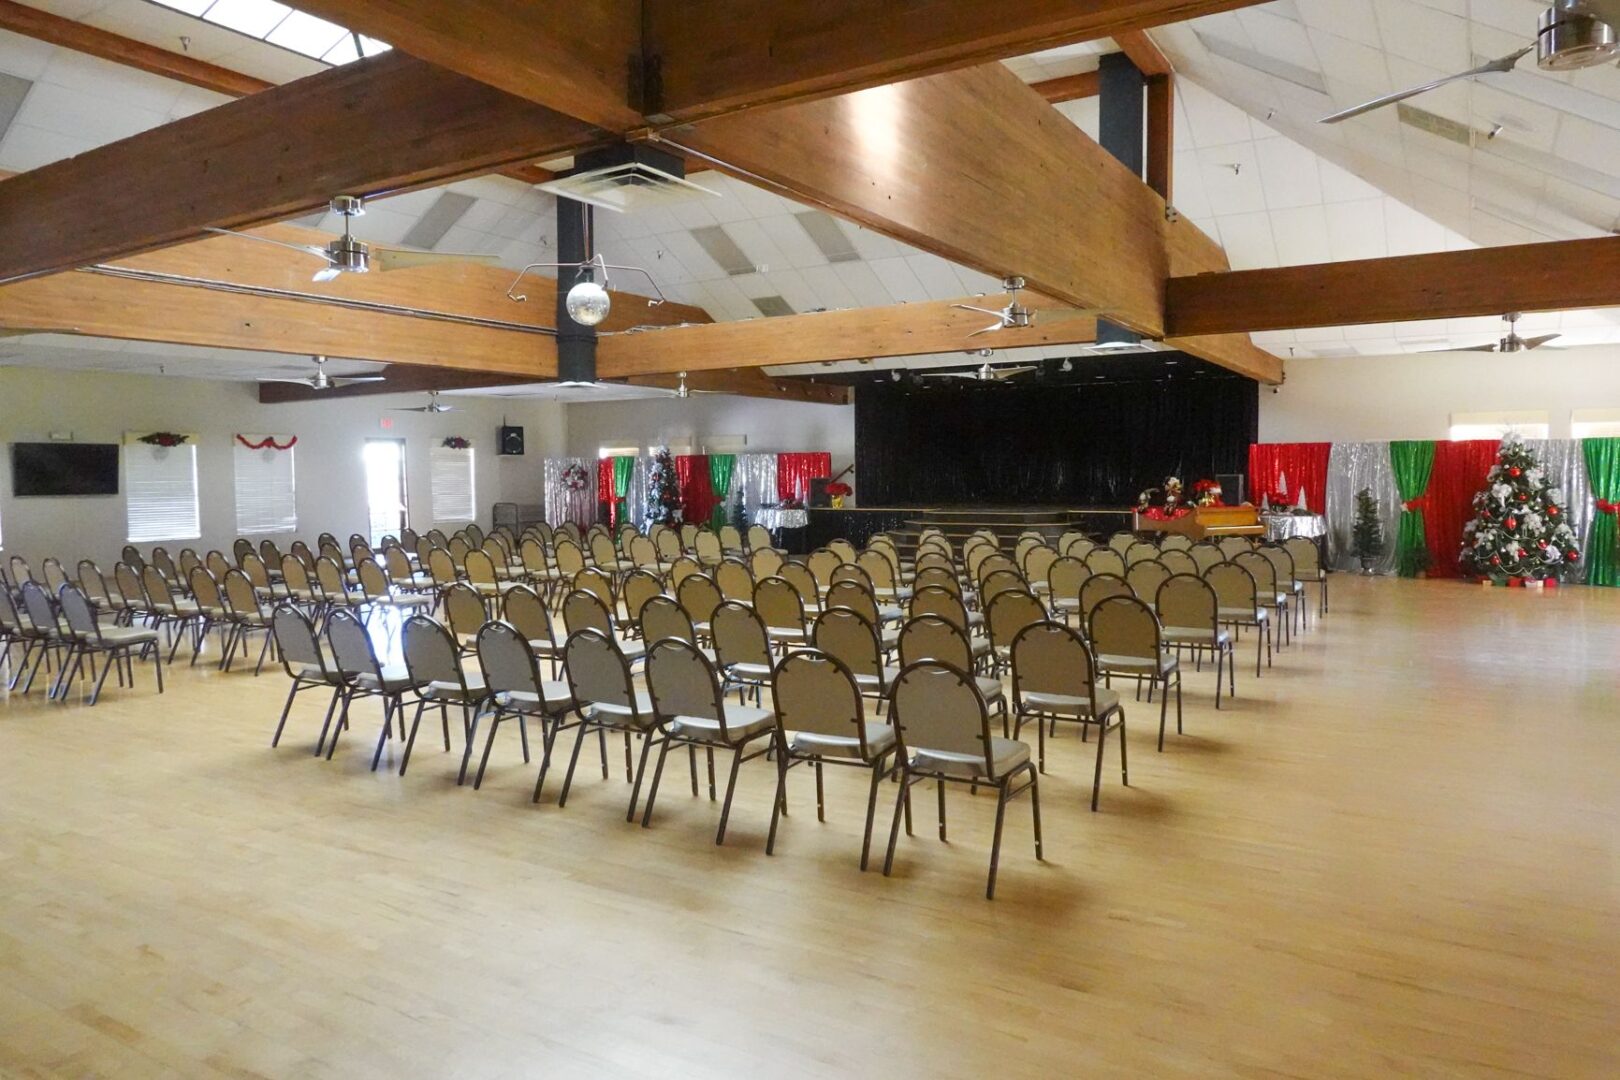 A large room filled with chairs and tables.